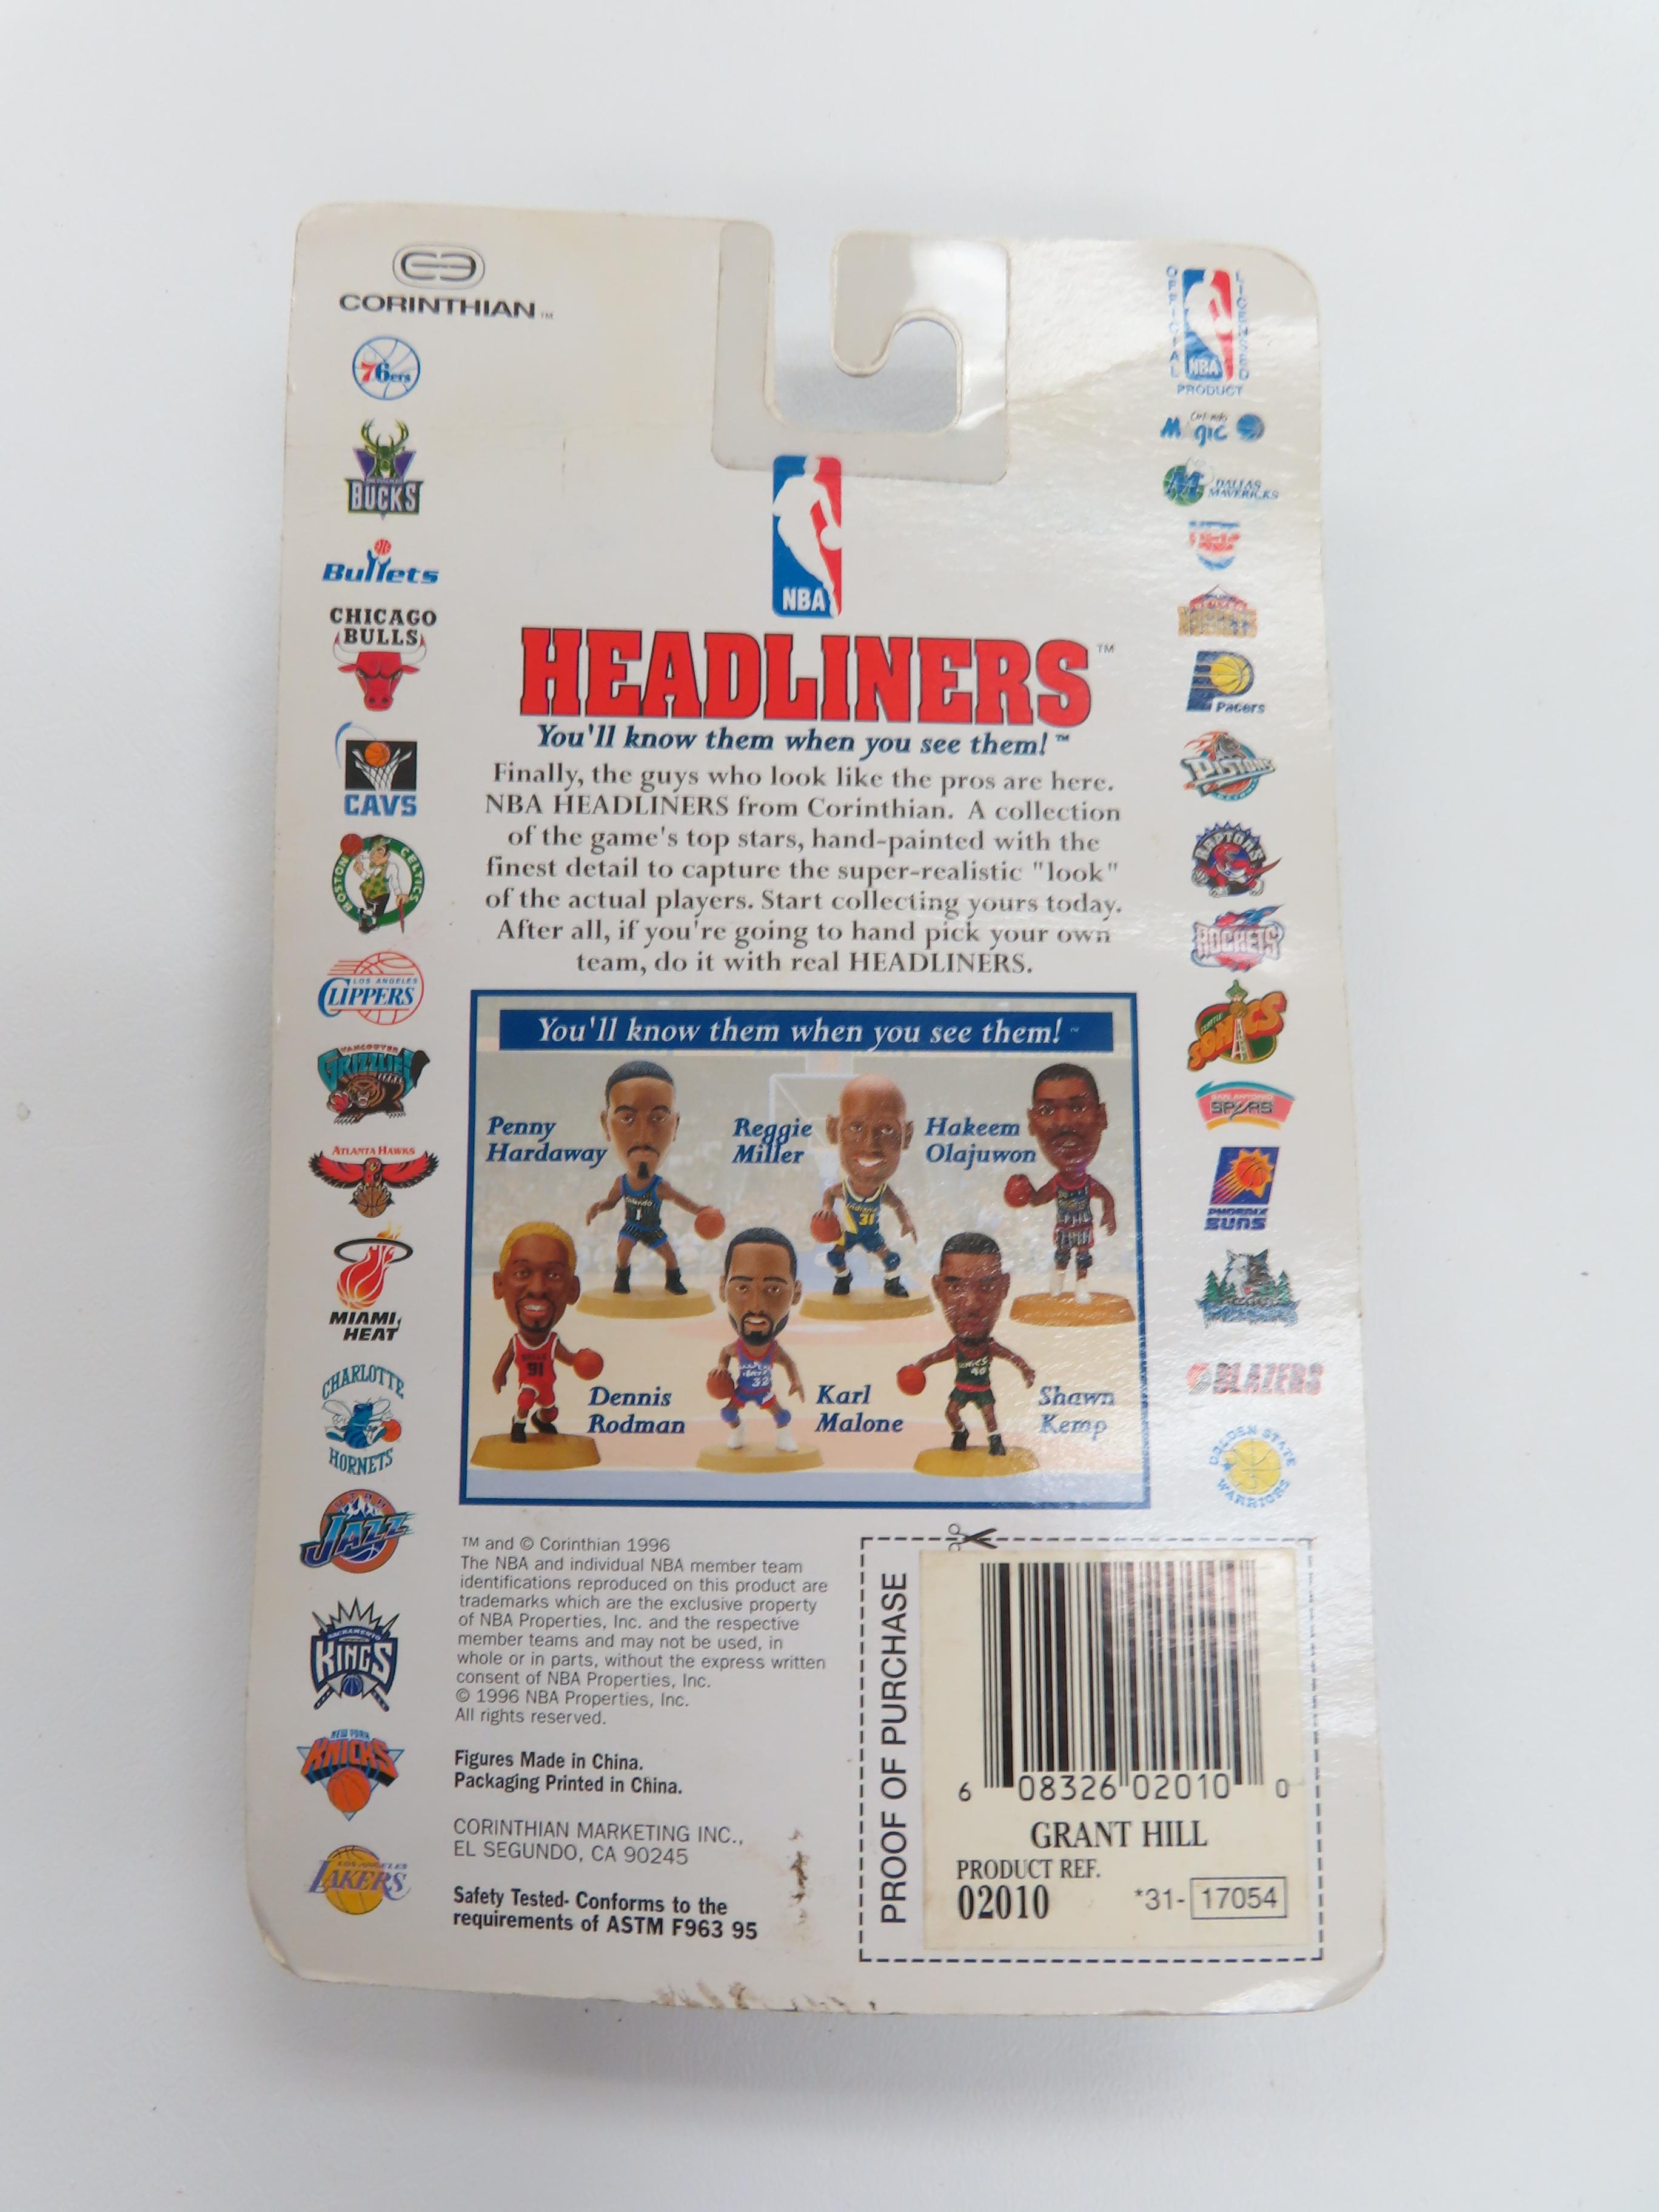 Grant Hill Signed 1996 Headliner with Authentication Direct COA (online verify)